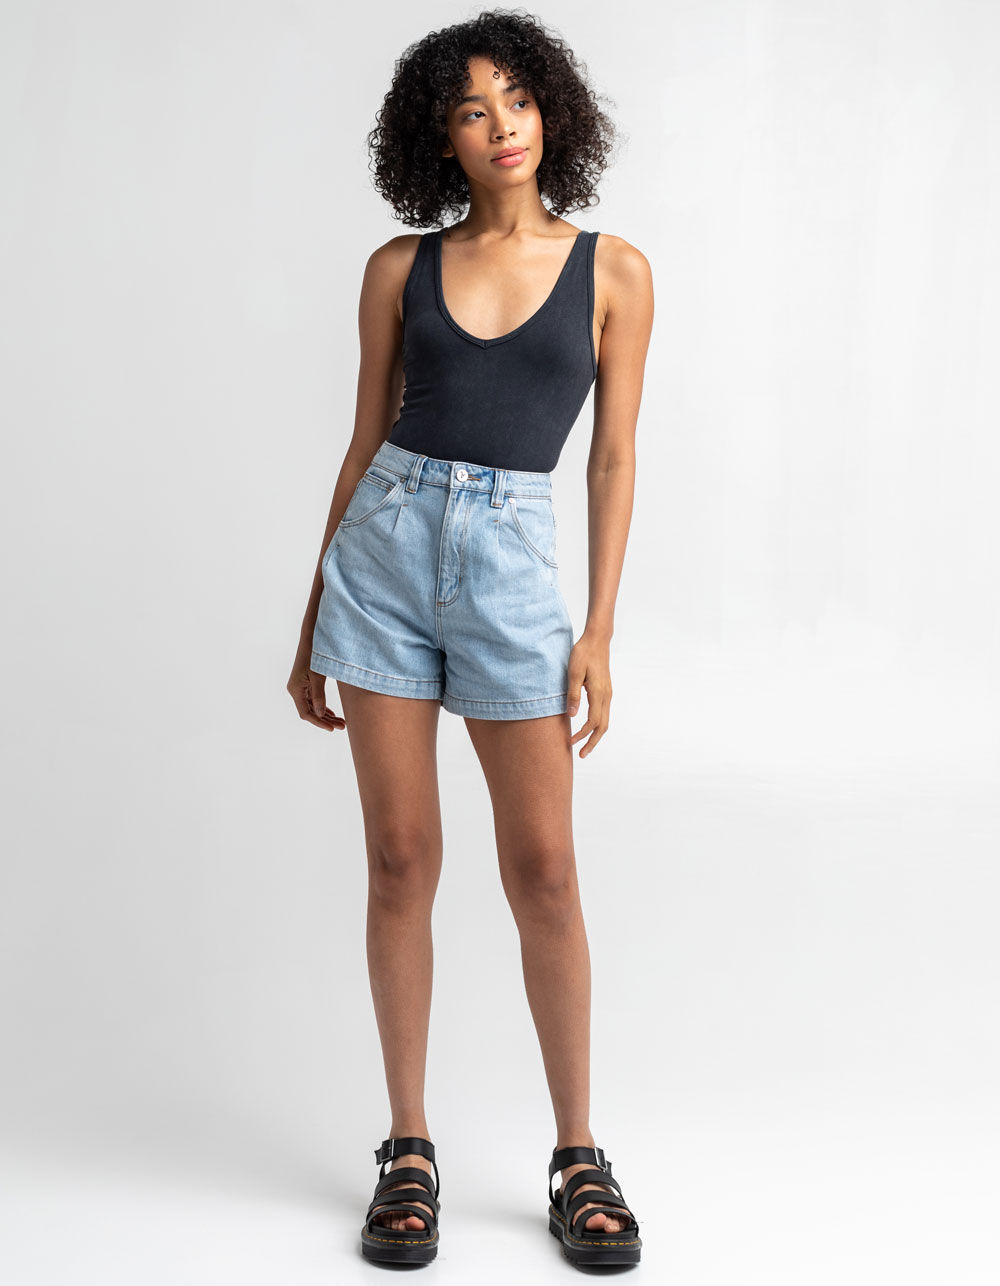 FREE PEOPLE Washed Seamless Graphite Bodysuit - GRAPHITE | Tillys